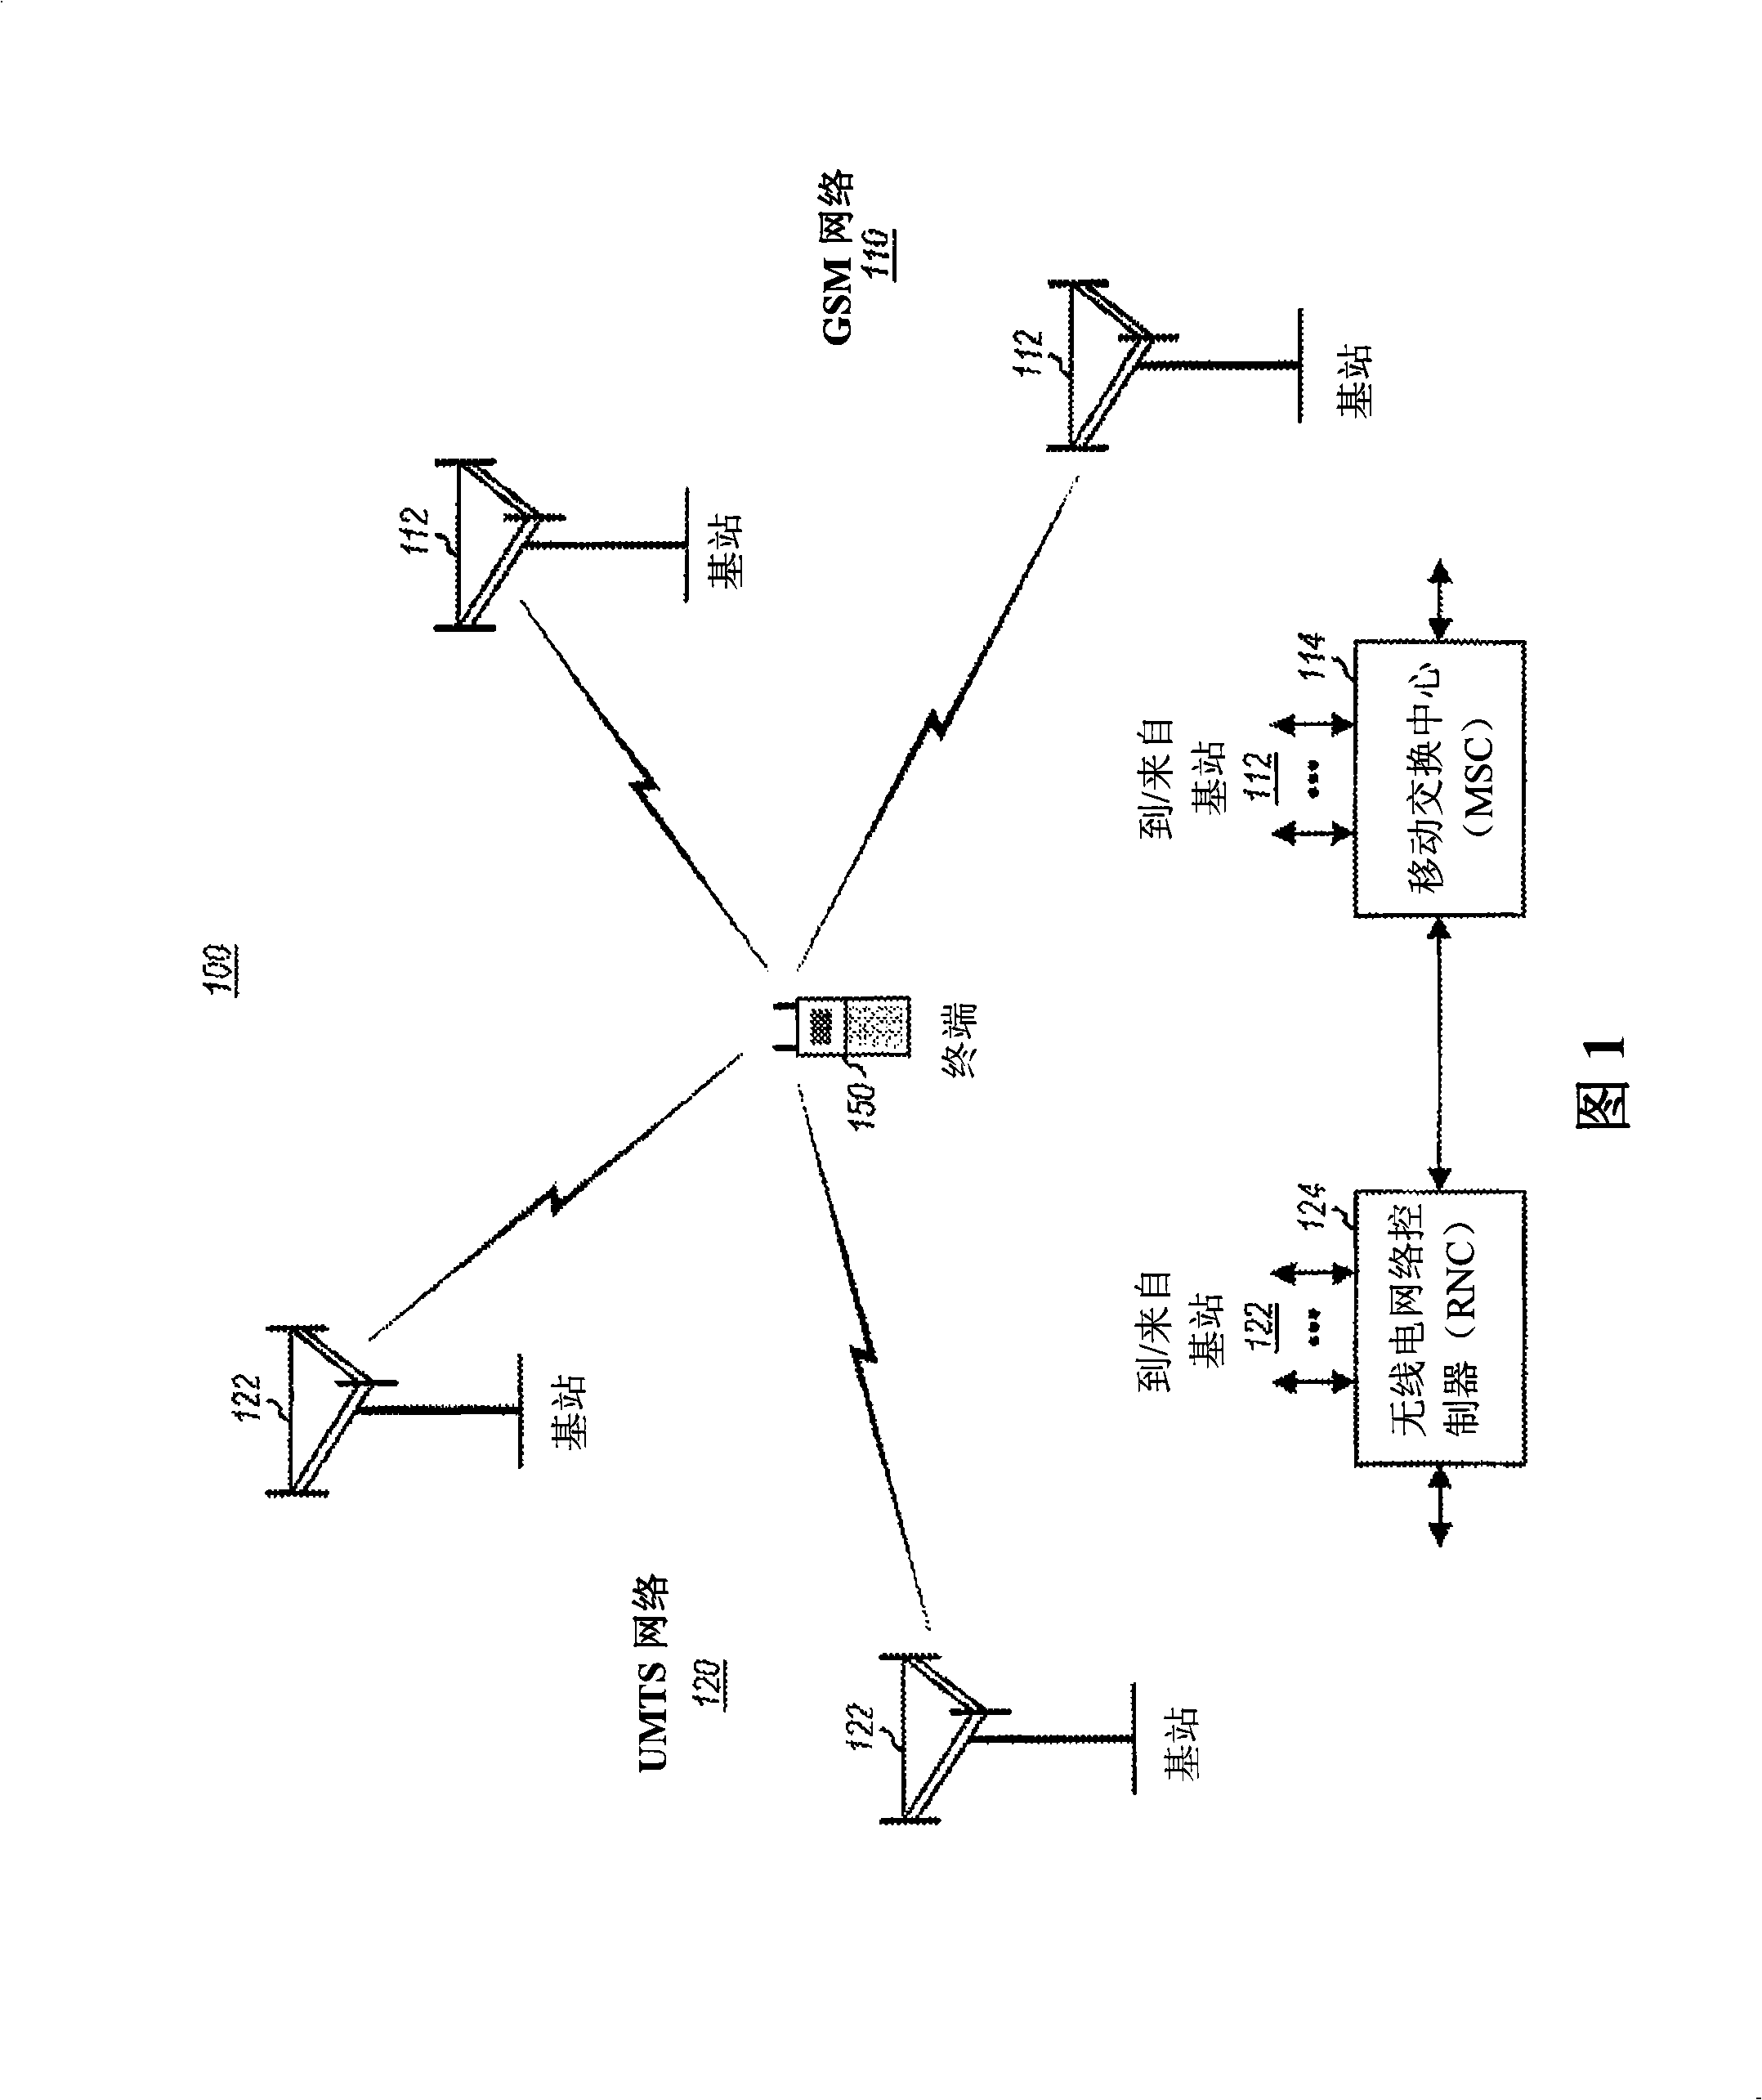 Diversity receiver for wireless communication